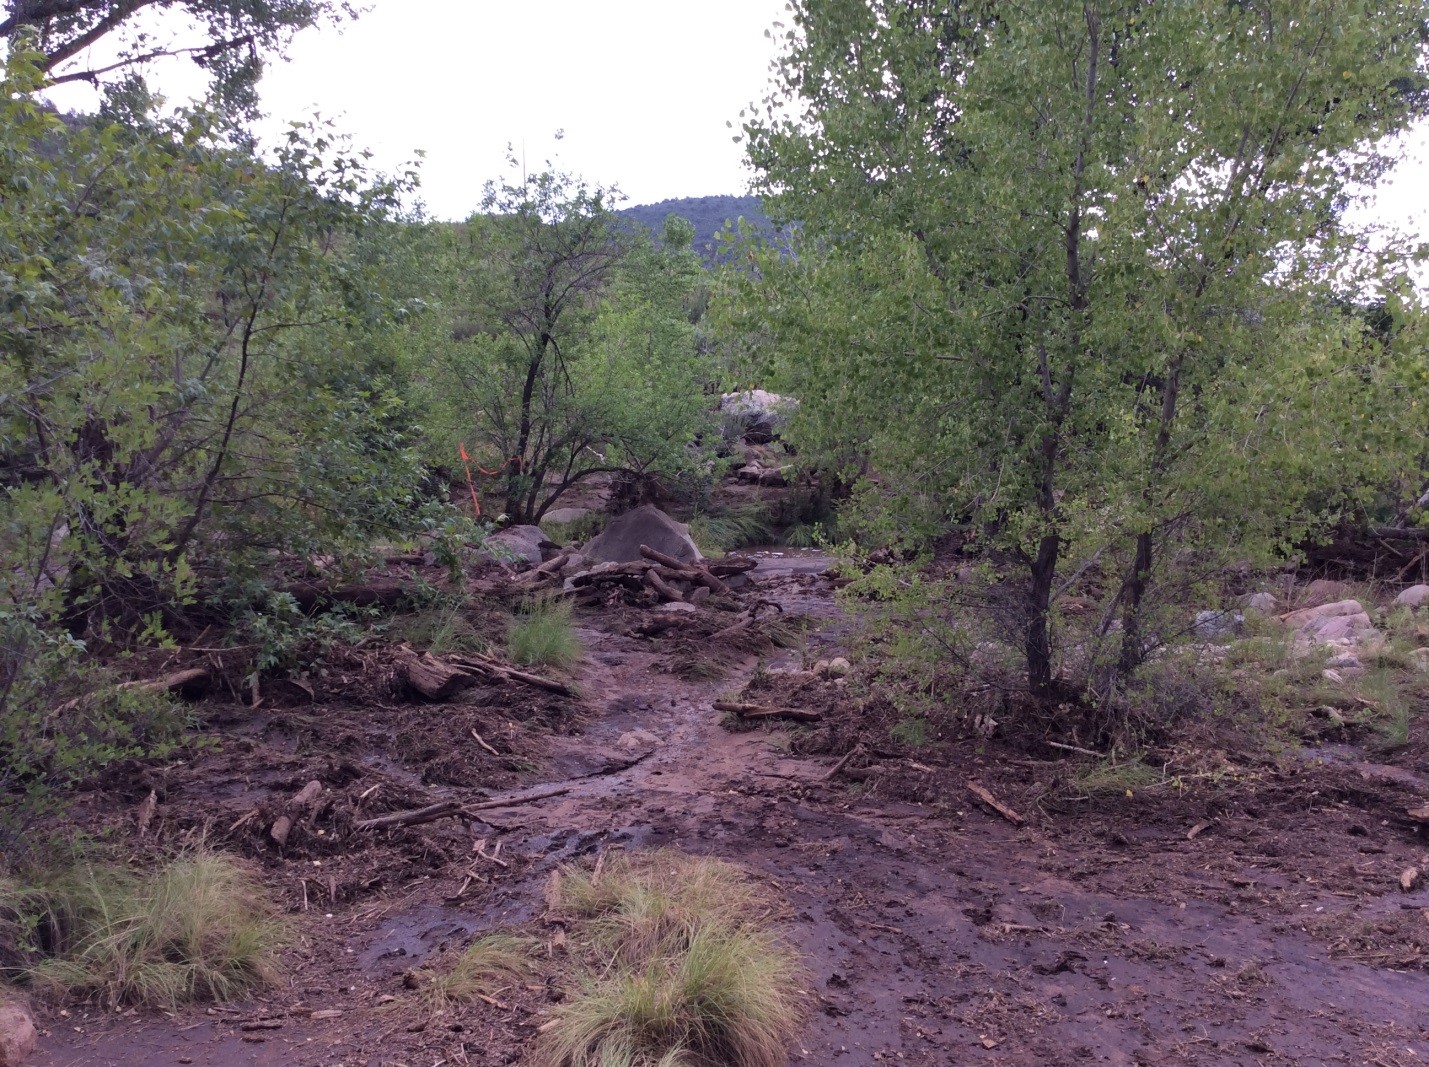 Bank of East Verde River, approximately 200 yards upstream from parking lot at Water Wheel Day Use Area.  Note substantial debris.